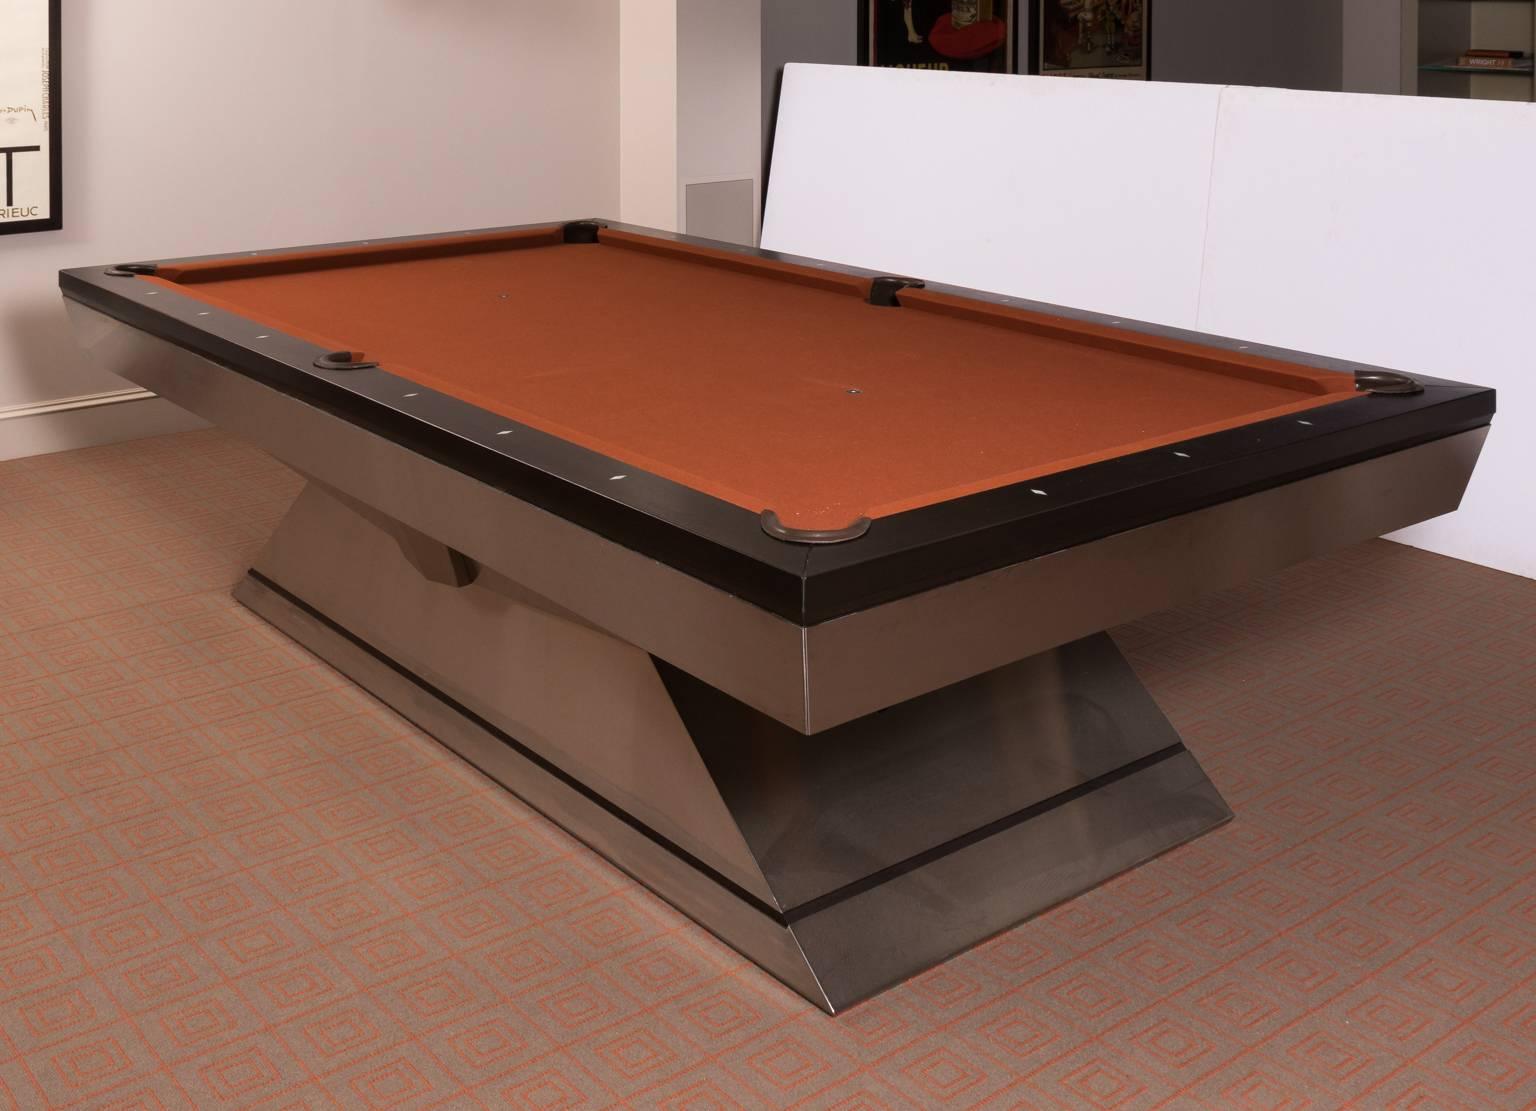 Custom-made monarch pool table that features Walnut rails with brushed stainless steel frame. Full rack included.